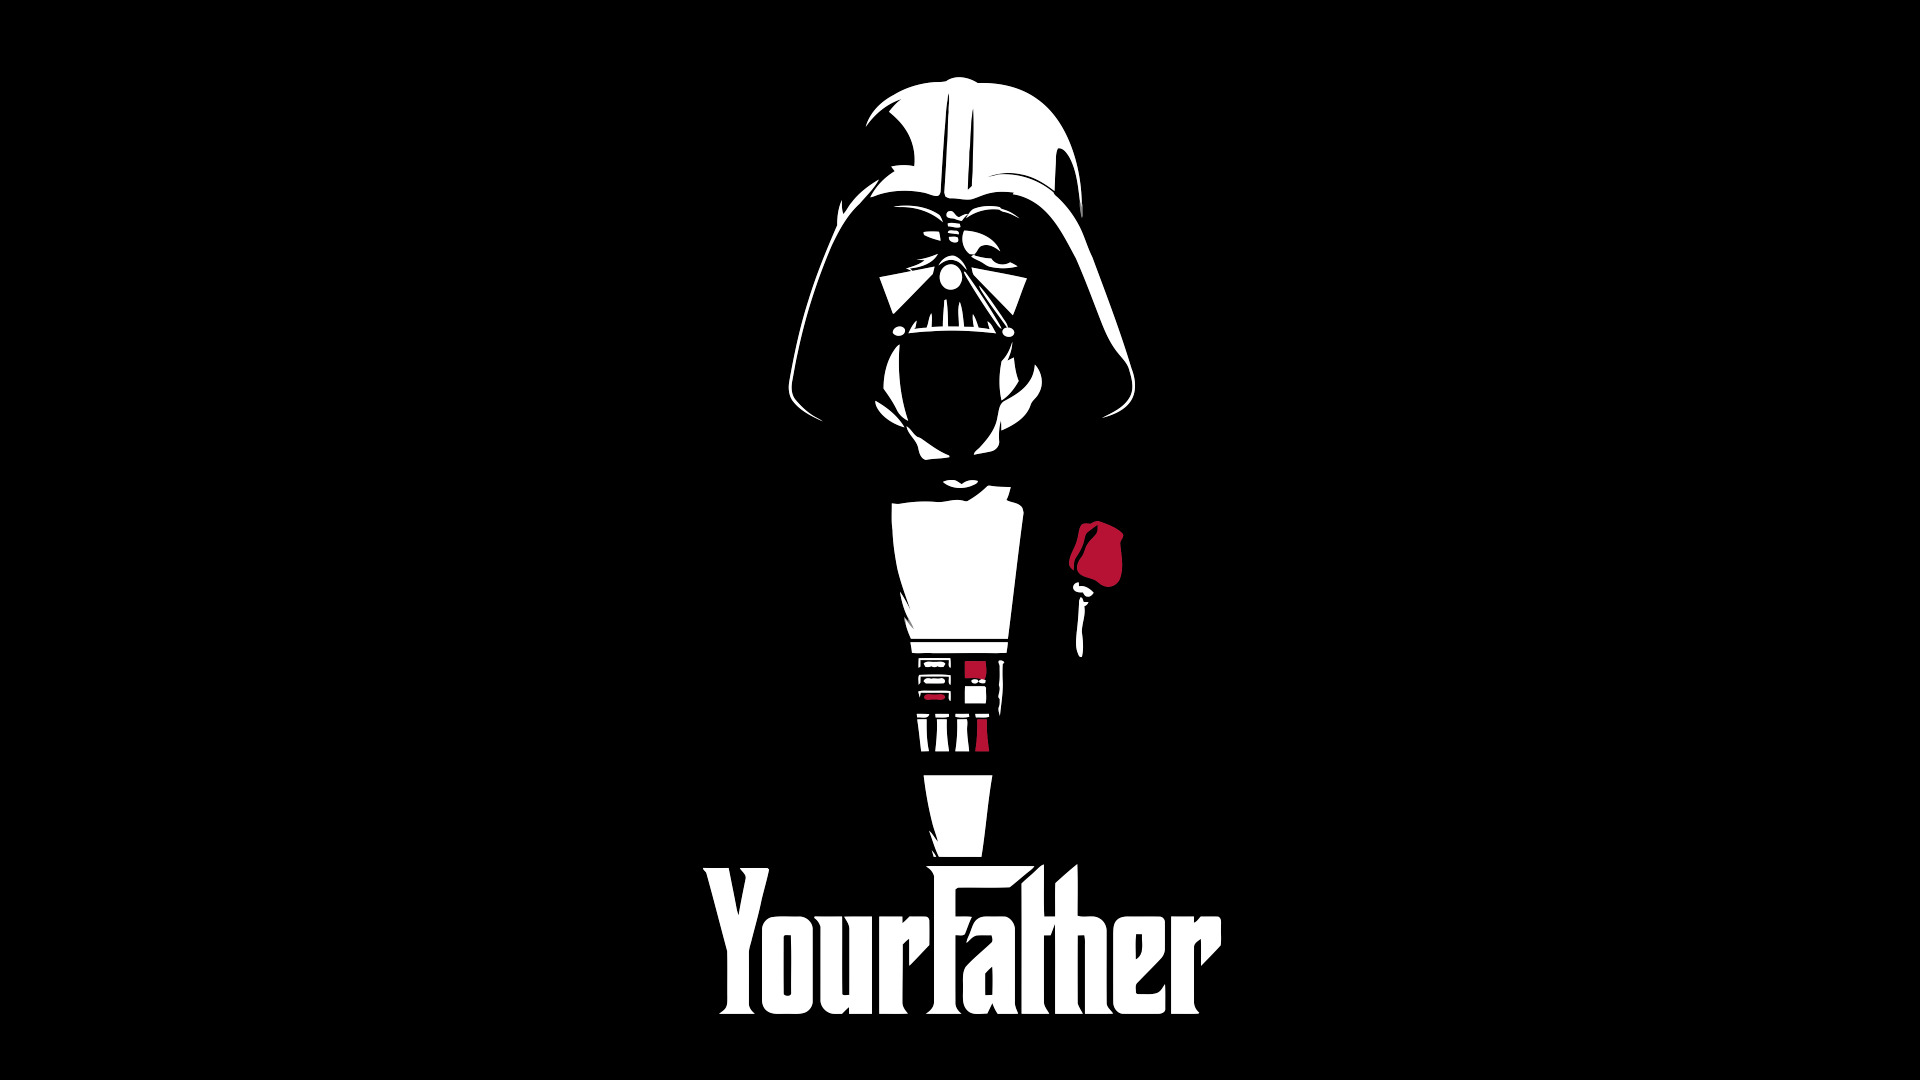 Darth Vader, The Godfather, Father, Star Wars Wallpaper